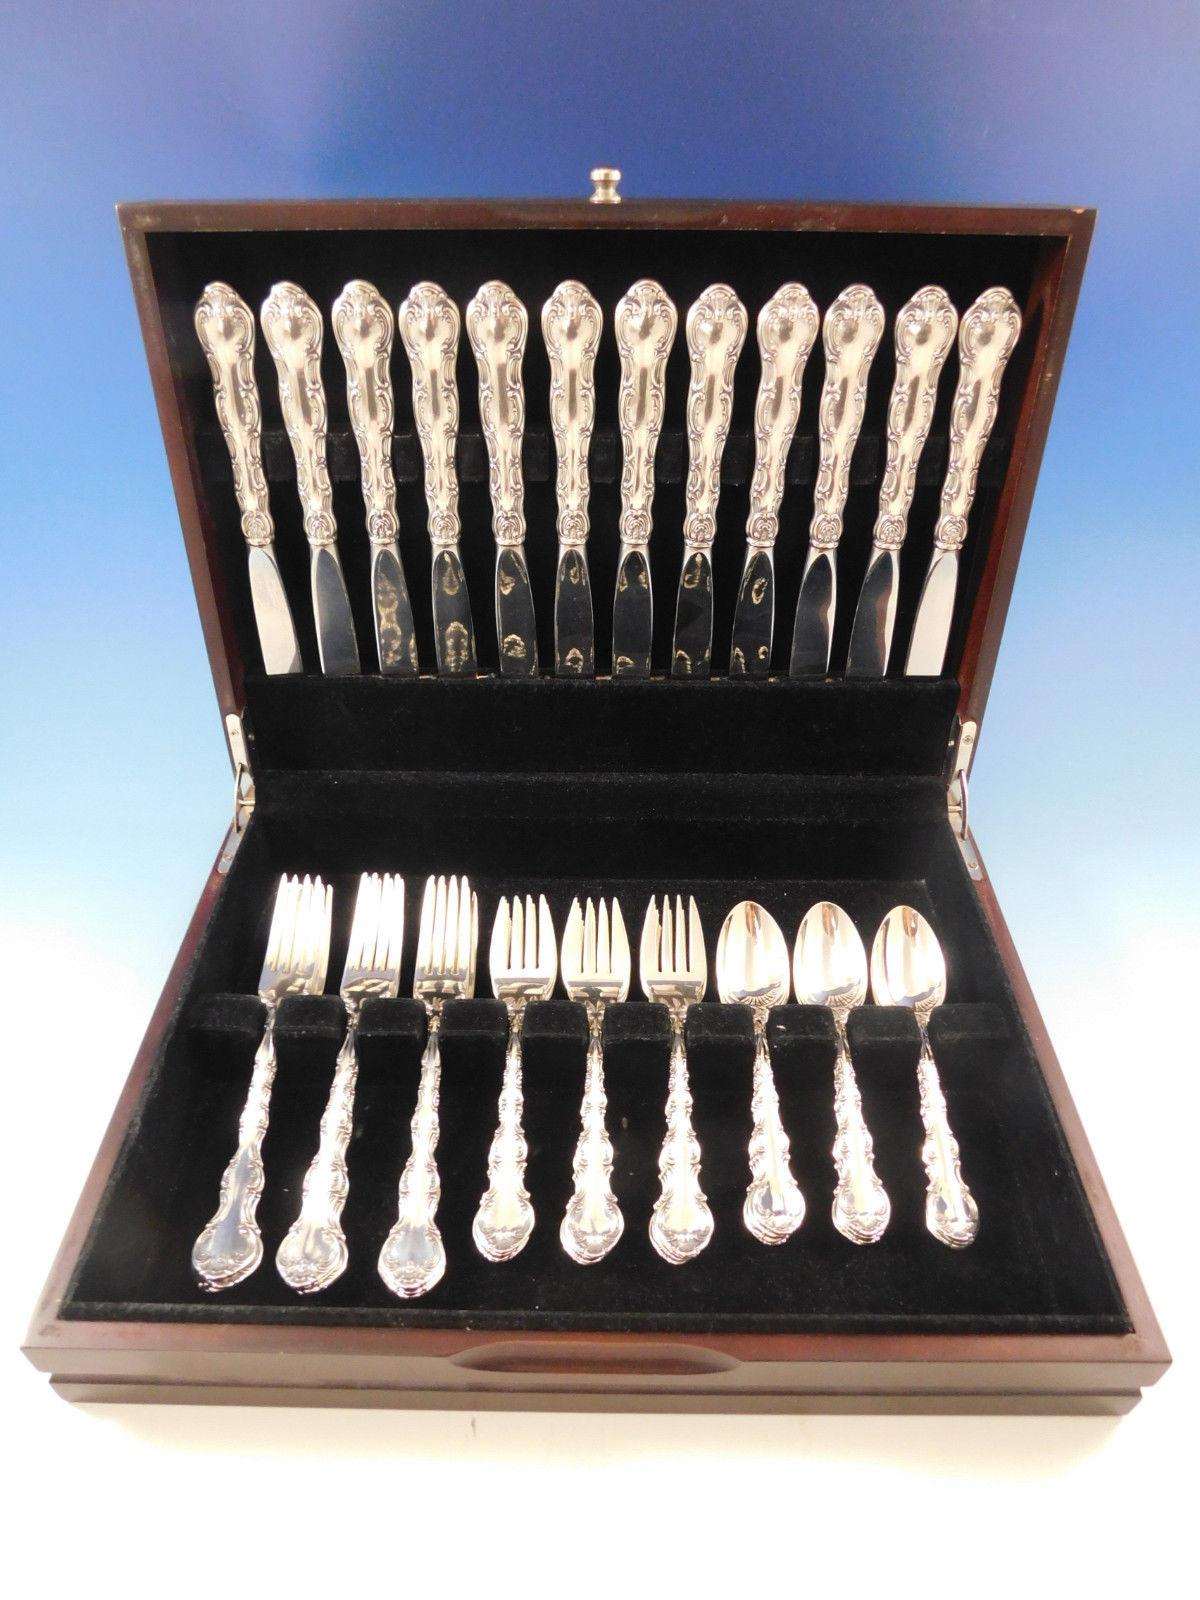 Place size strasbourg by Gorham sterling silver flatware set - 48 pieces. This set includes:

12 place knives, 9 1/4